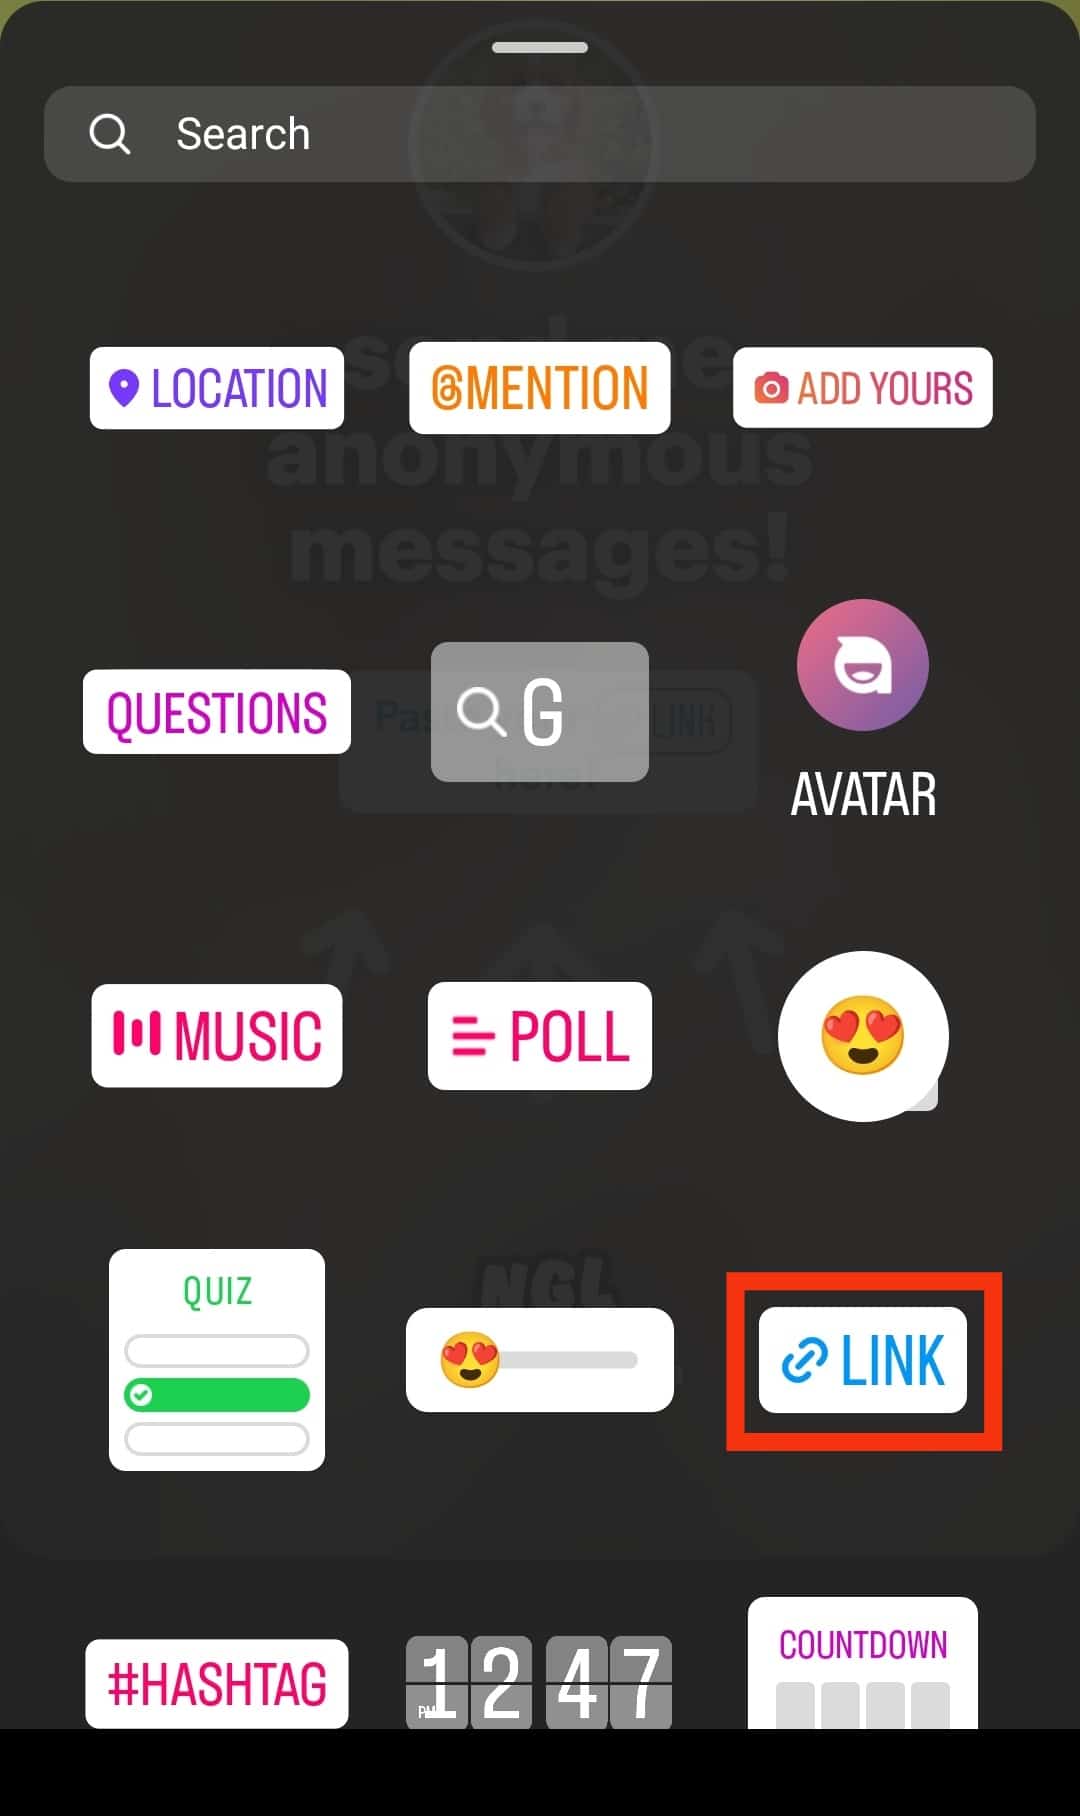 Select The Link Sticker